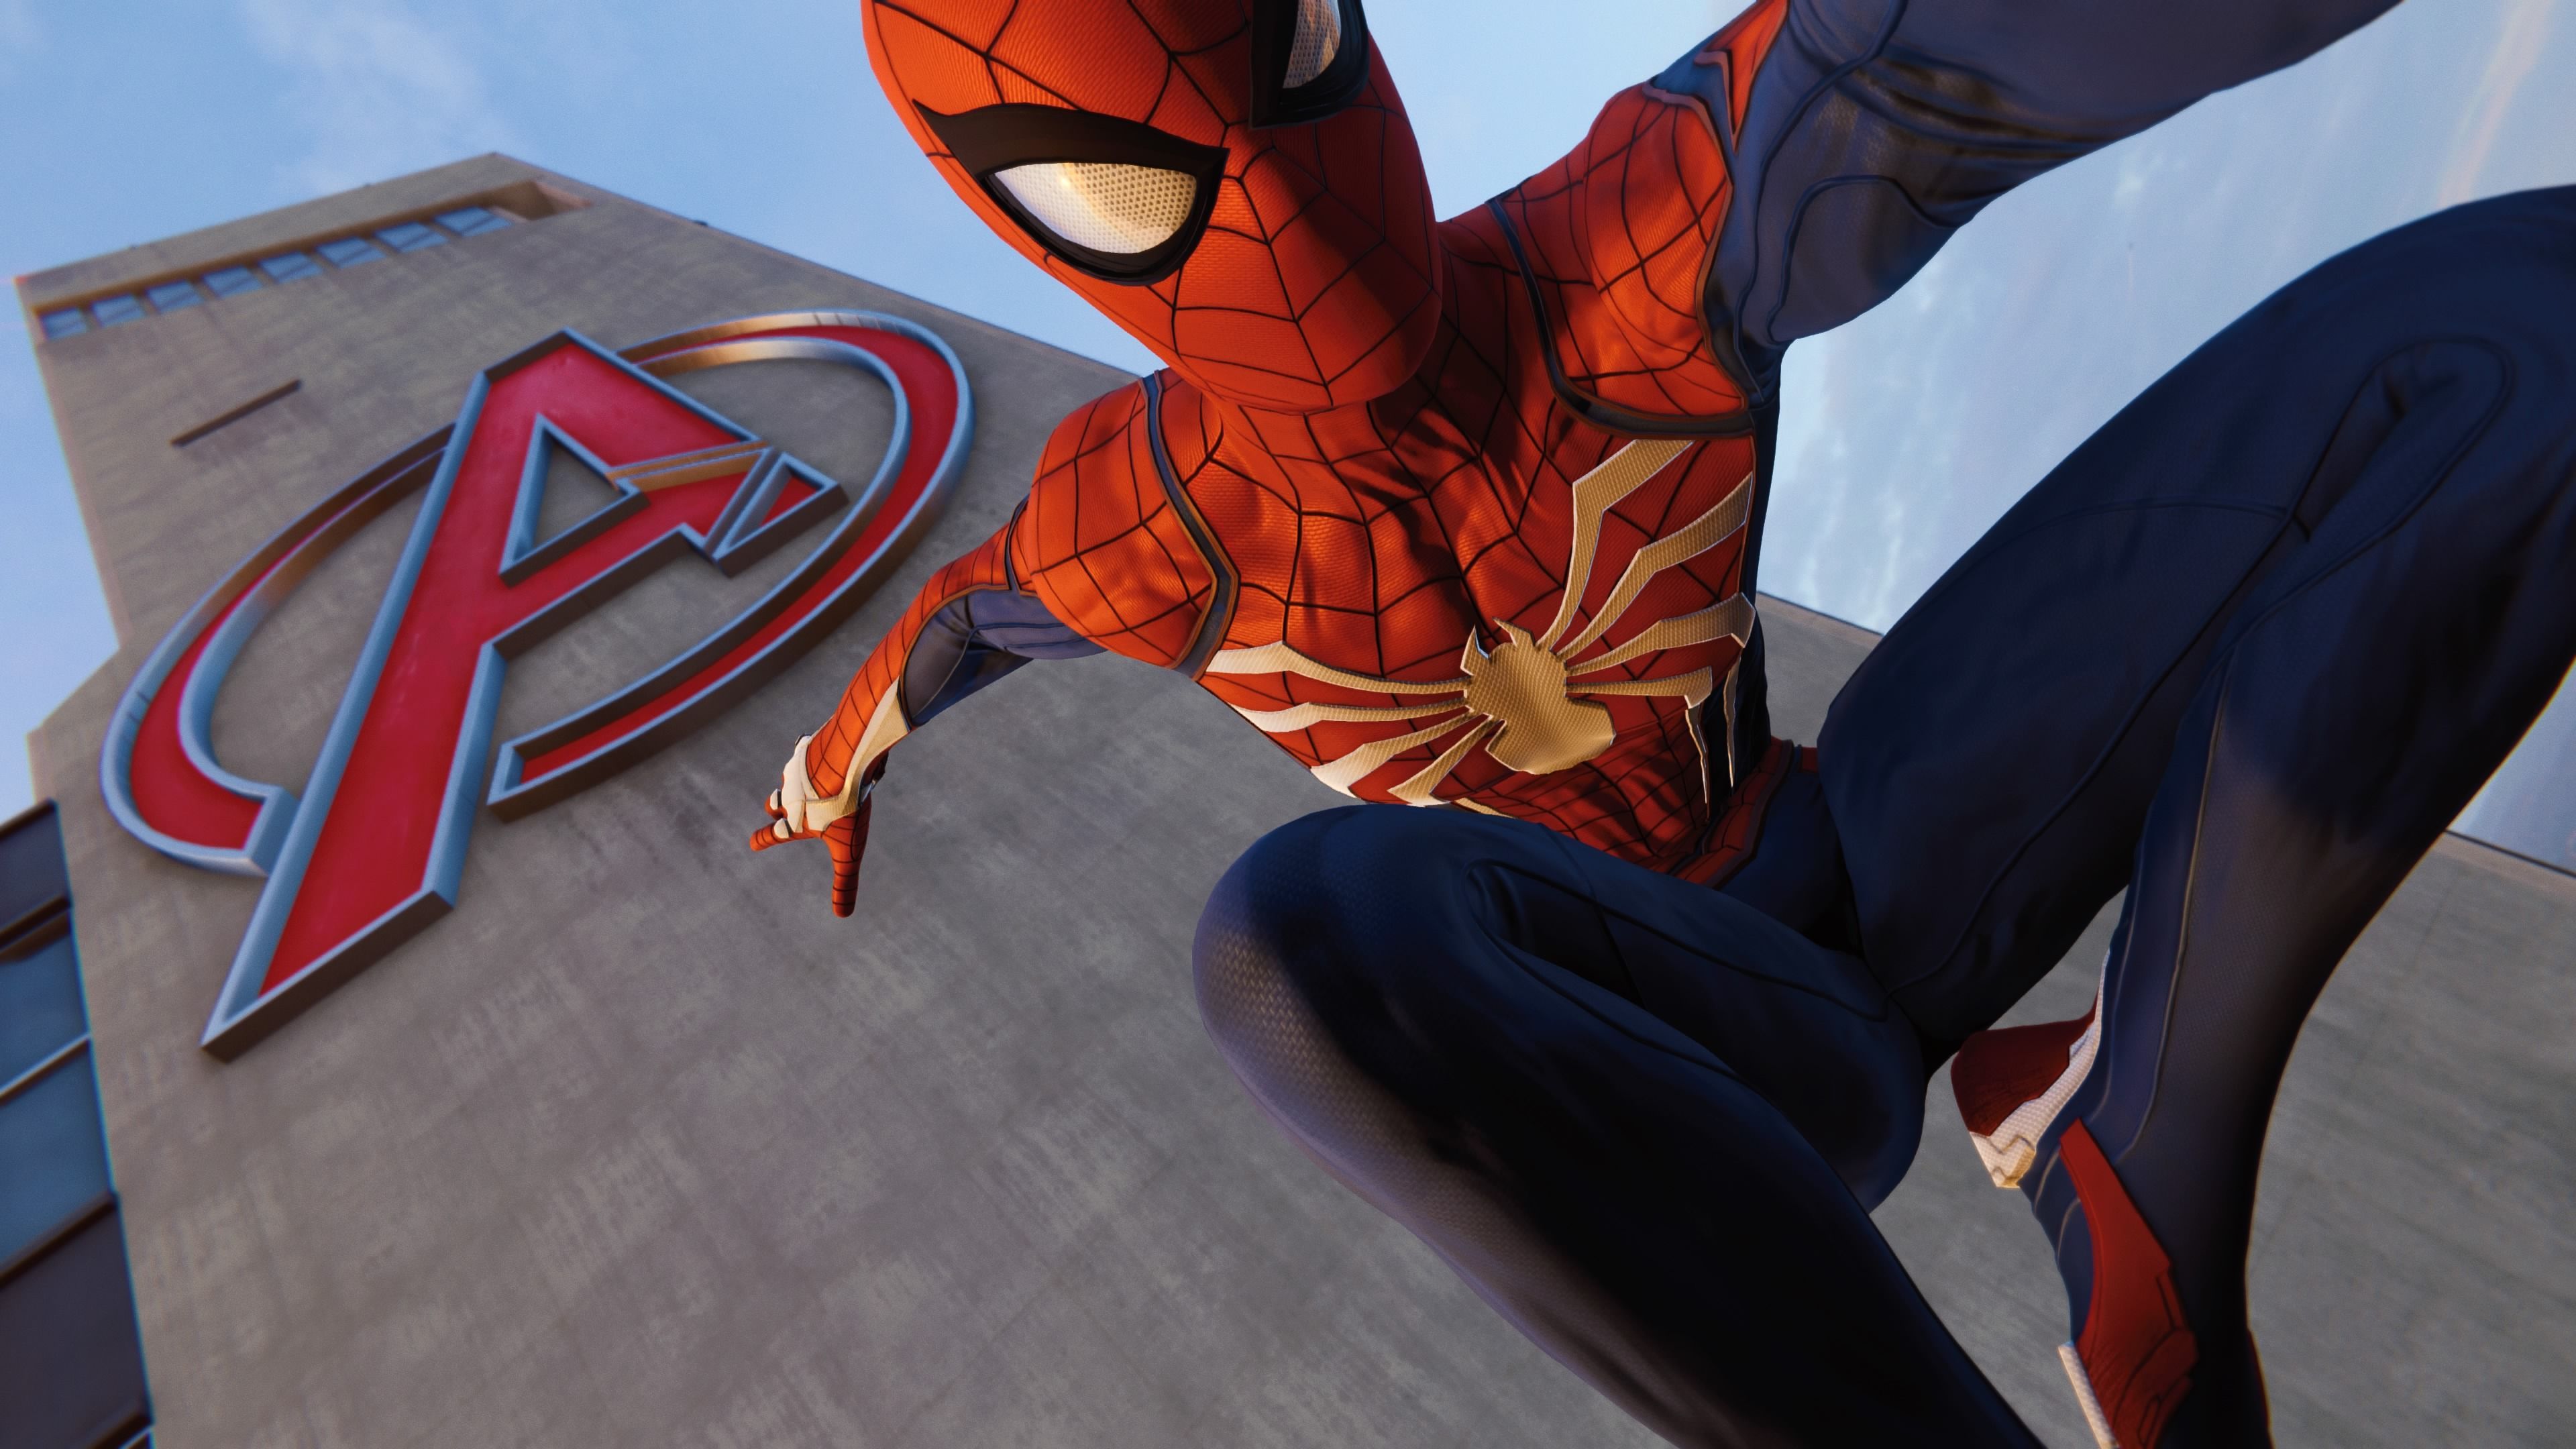 Ps4 Pro Spiderman Avengers Tower superheroes wallpaper, spiderman wallpaper, spiderman ps4 wallpaper, ps4 games. Spiderman, Spiderman ps4 wallpaper, Superhero